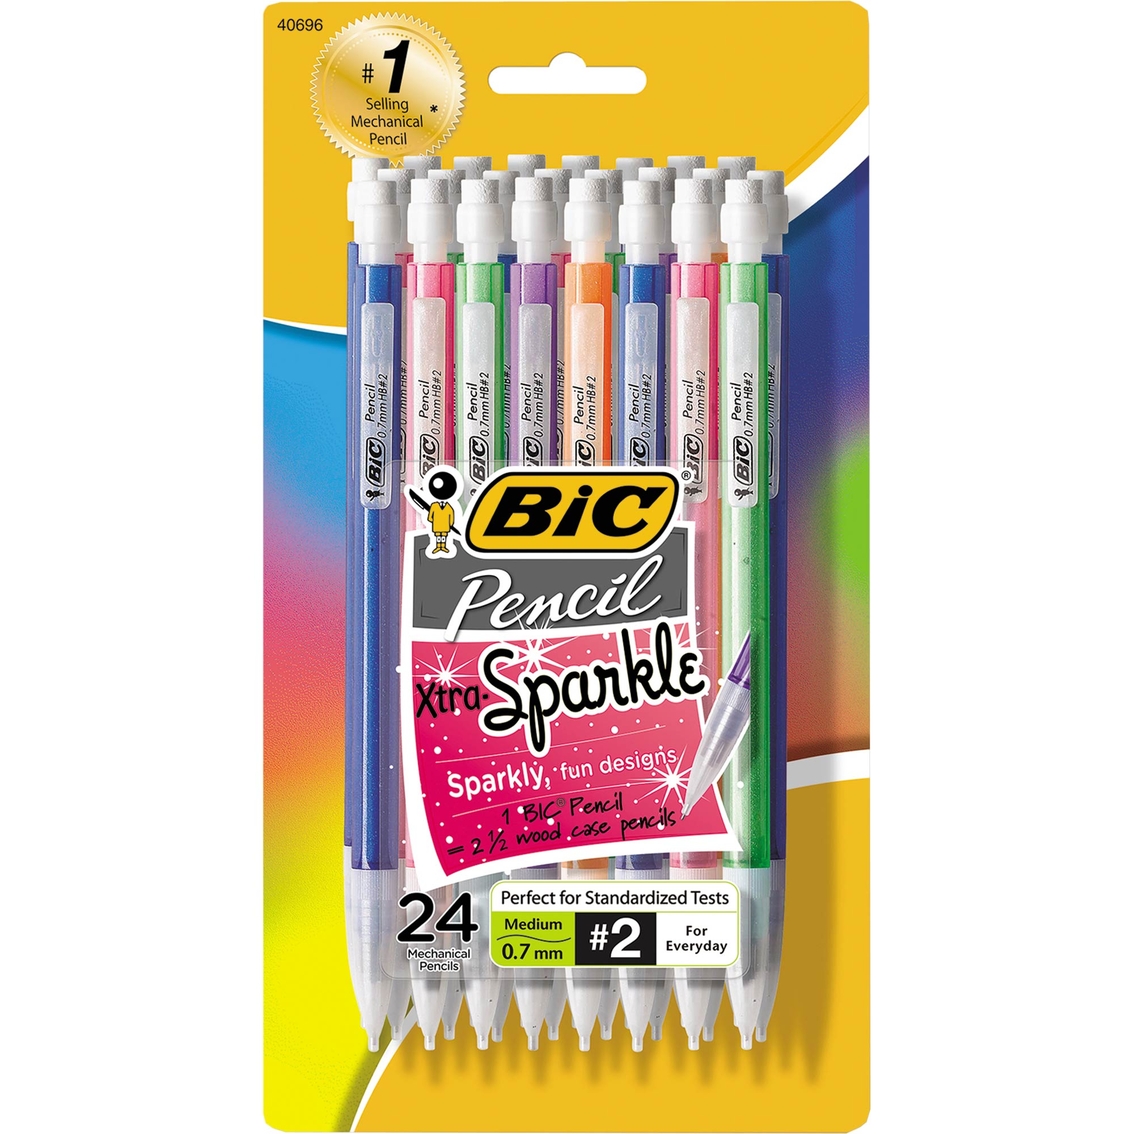 BIC 0.7mm Xtra Sparkle Mechanical Pencil 24 Pk. - Image 2 of 2